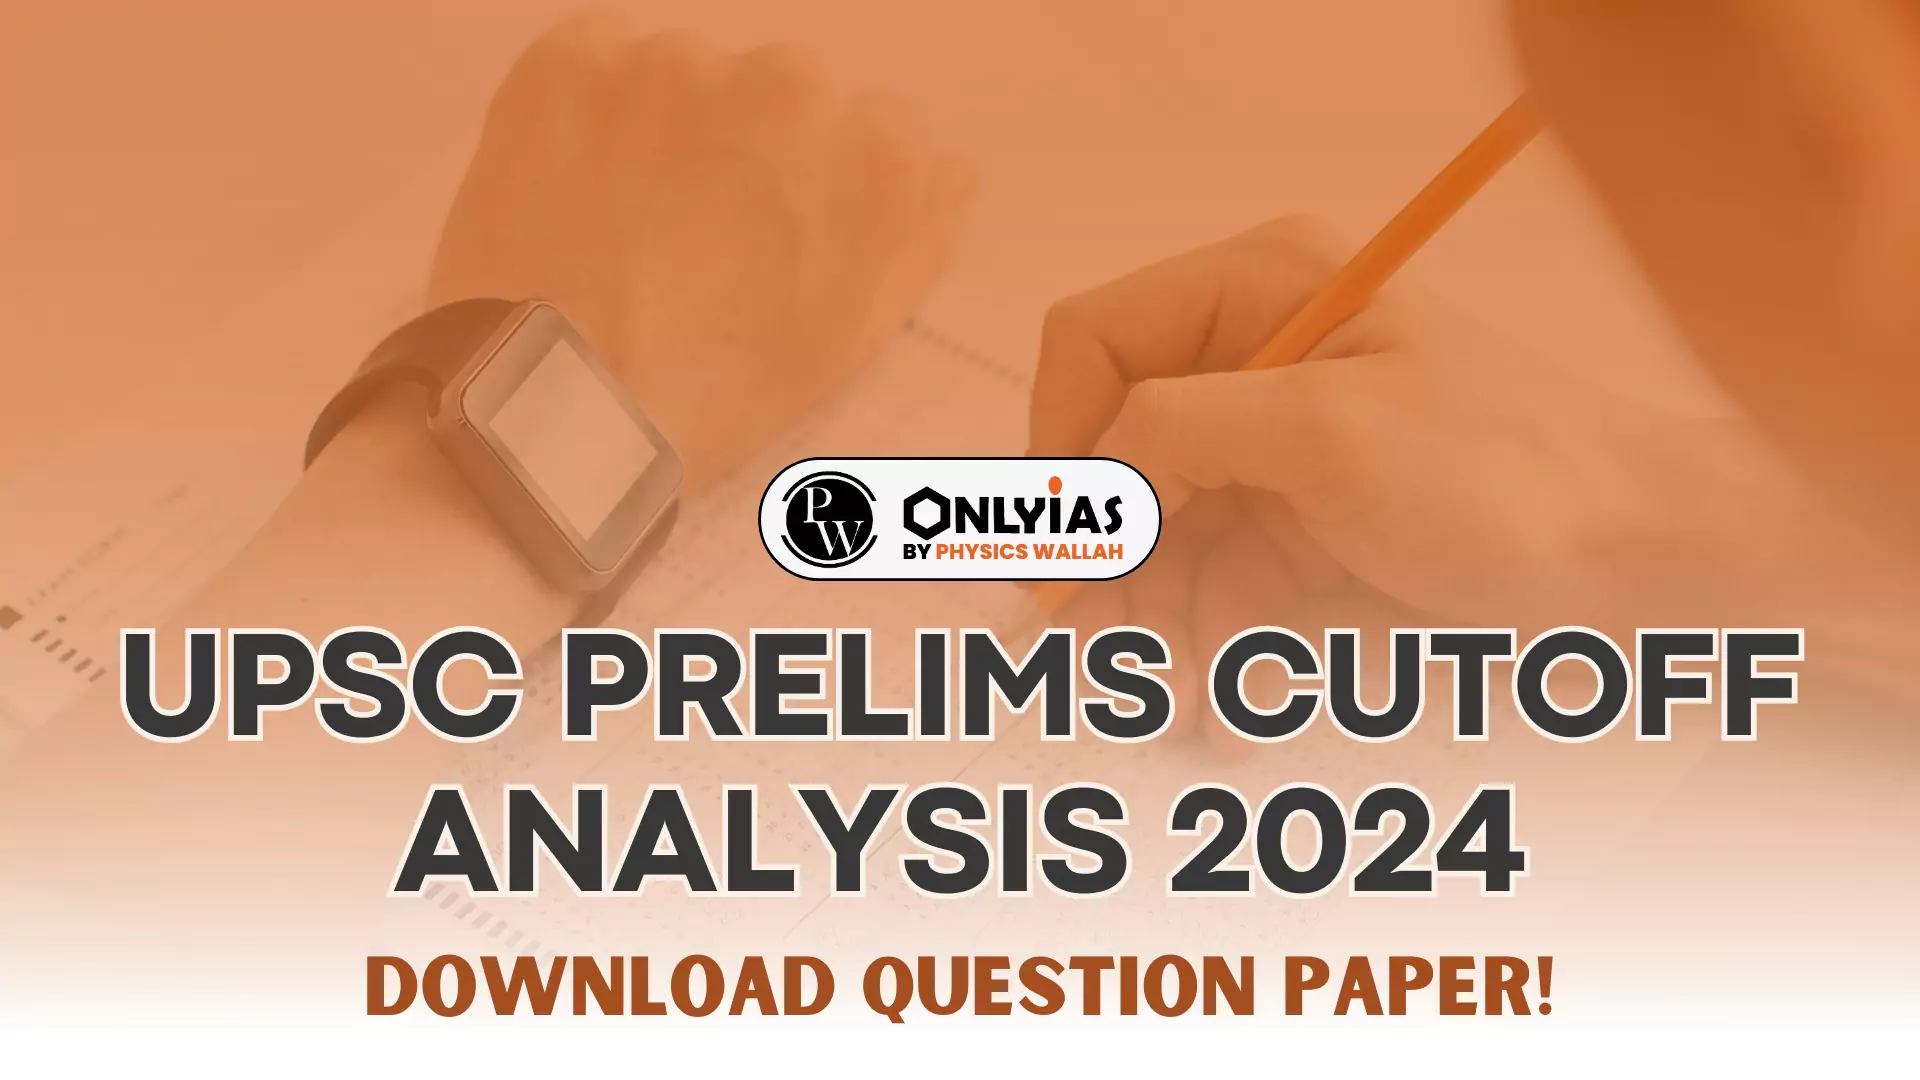 UPSC Prelims Cutoff Analysis 2024, Download Question Paper! PWOnlyIAS